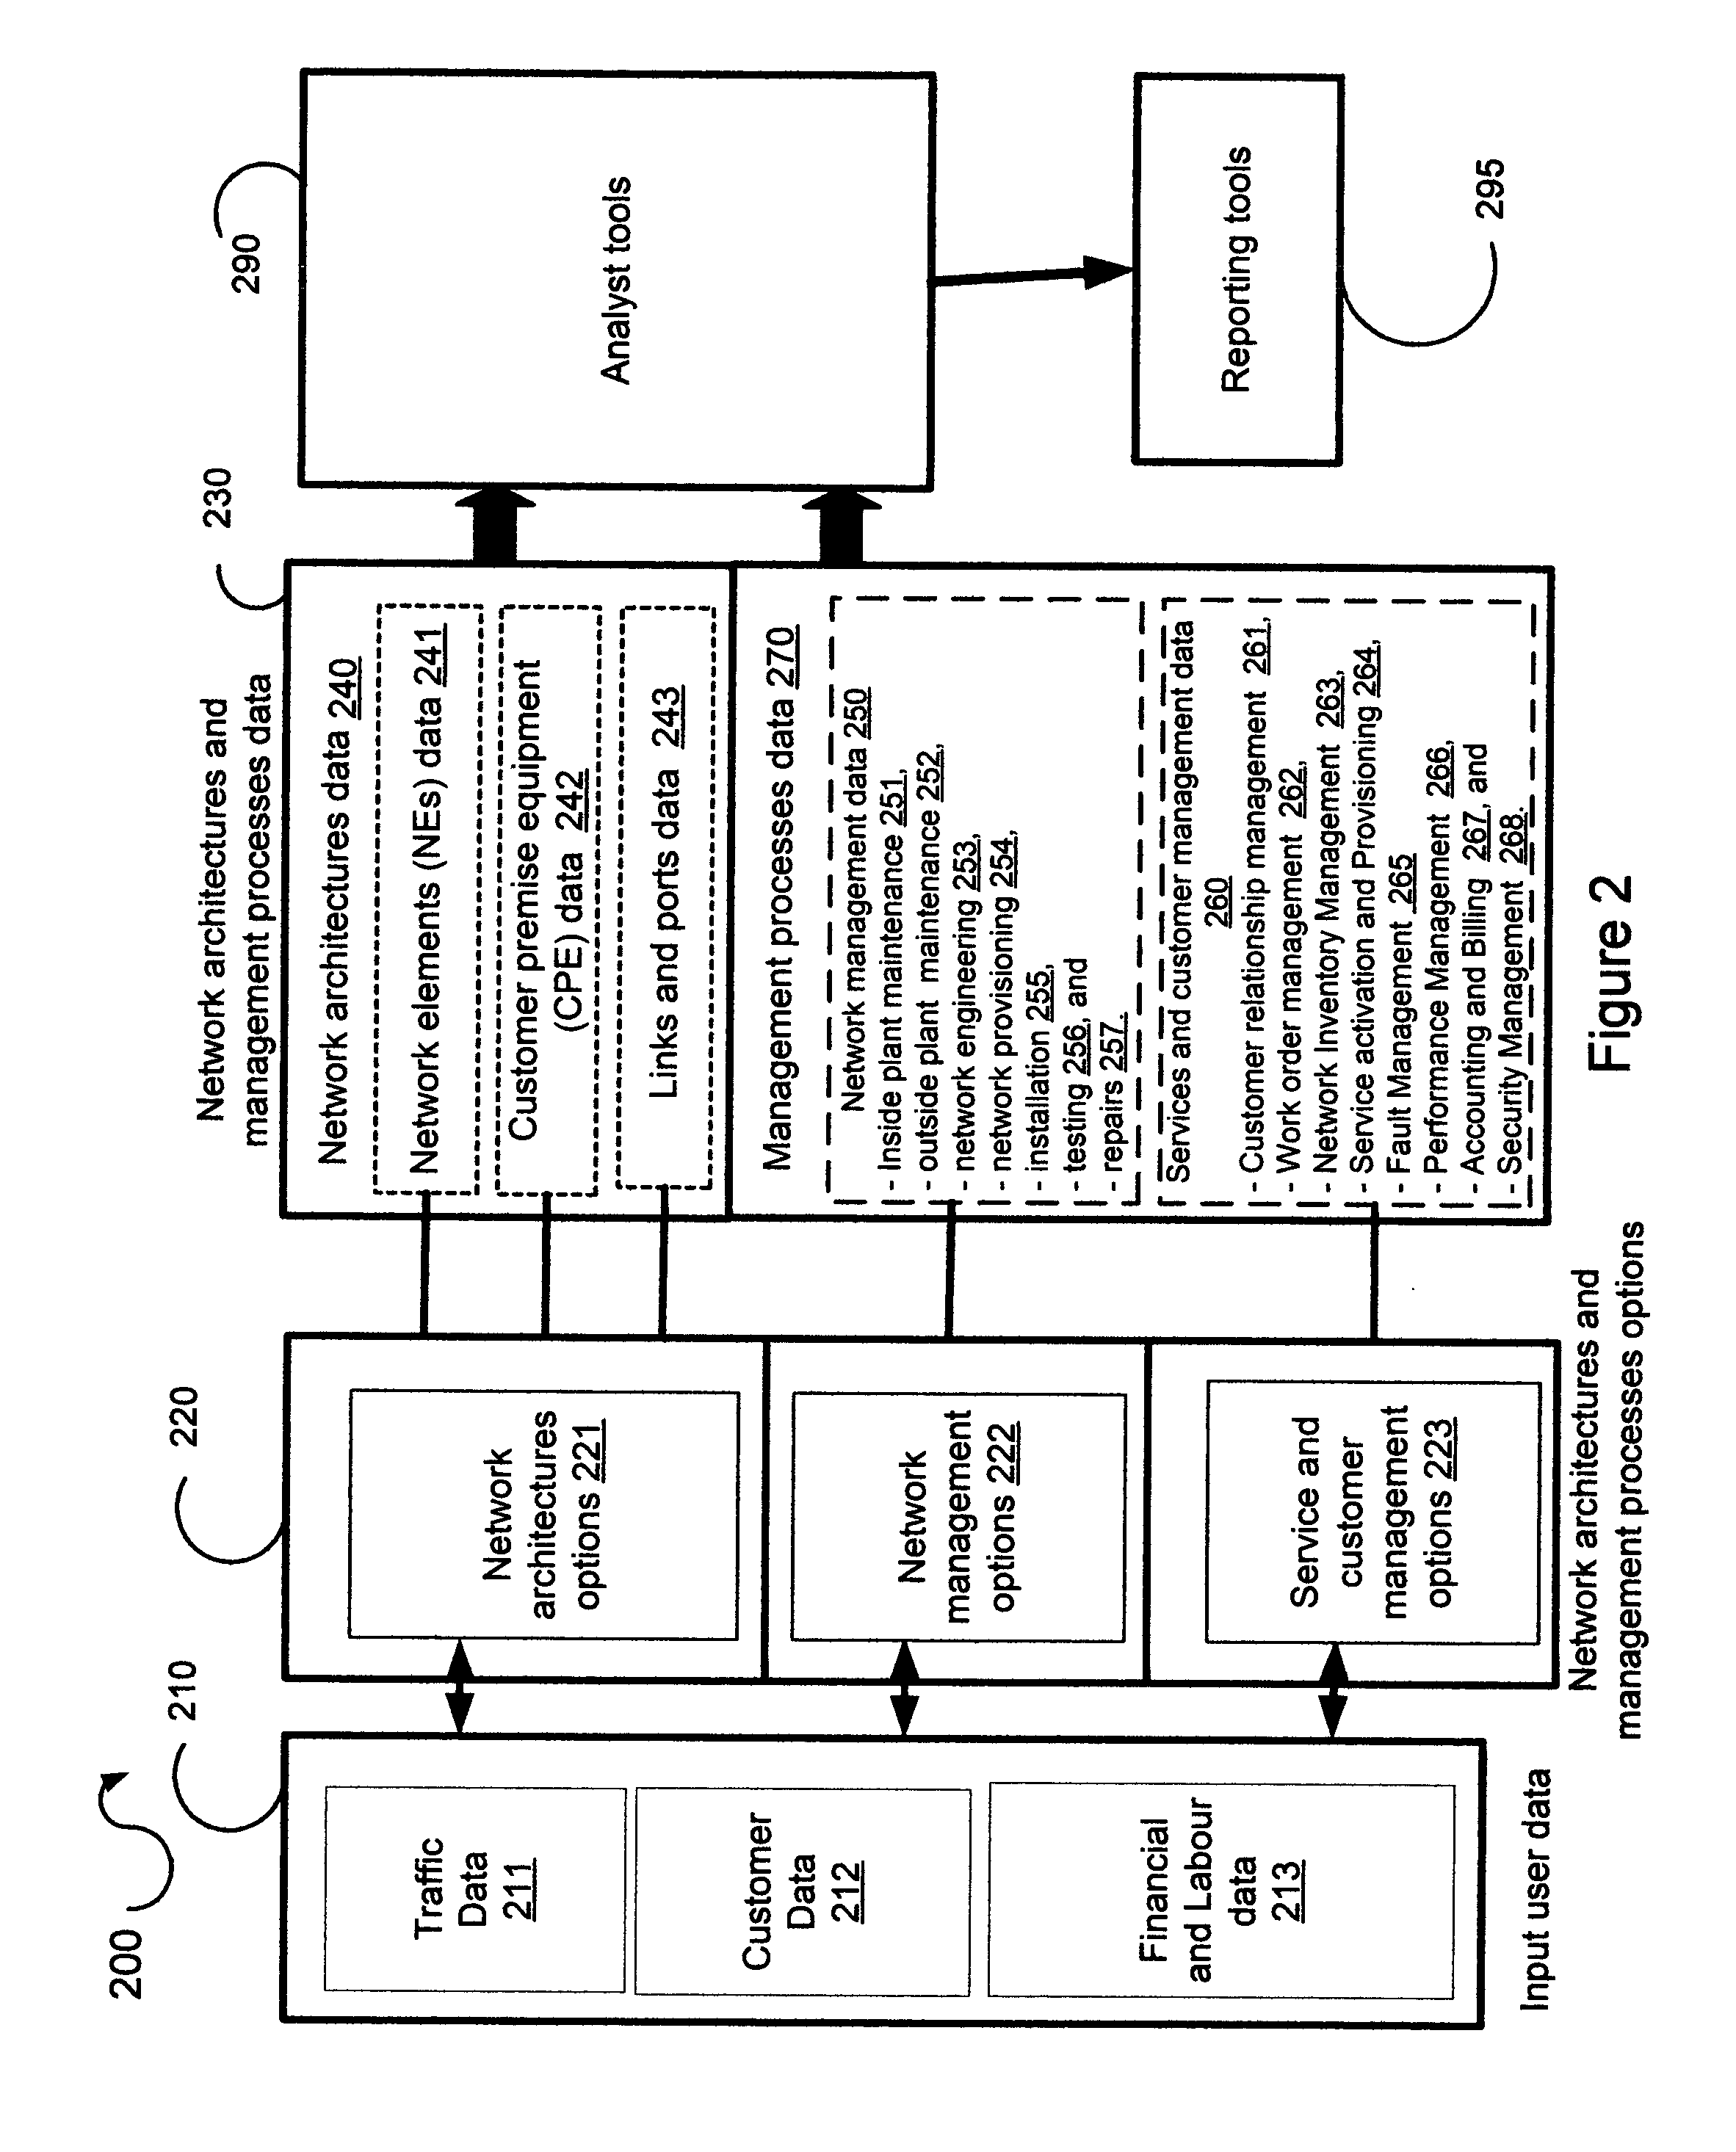 Tool and method for operations, management, capacity, and services business solution for a telecommunications network